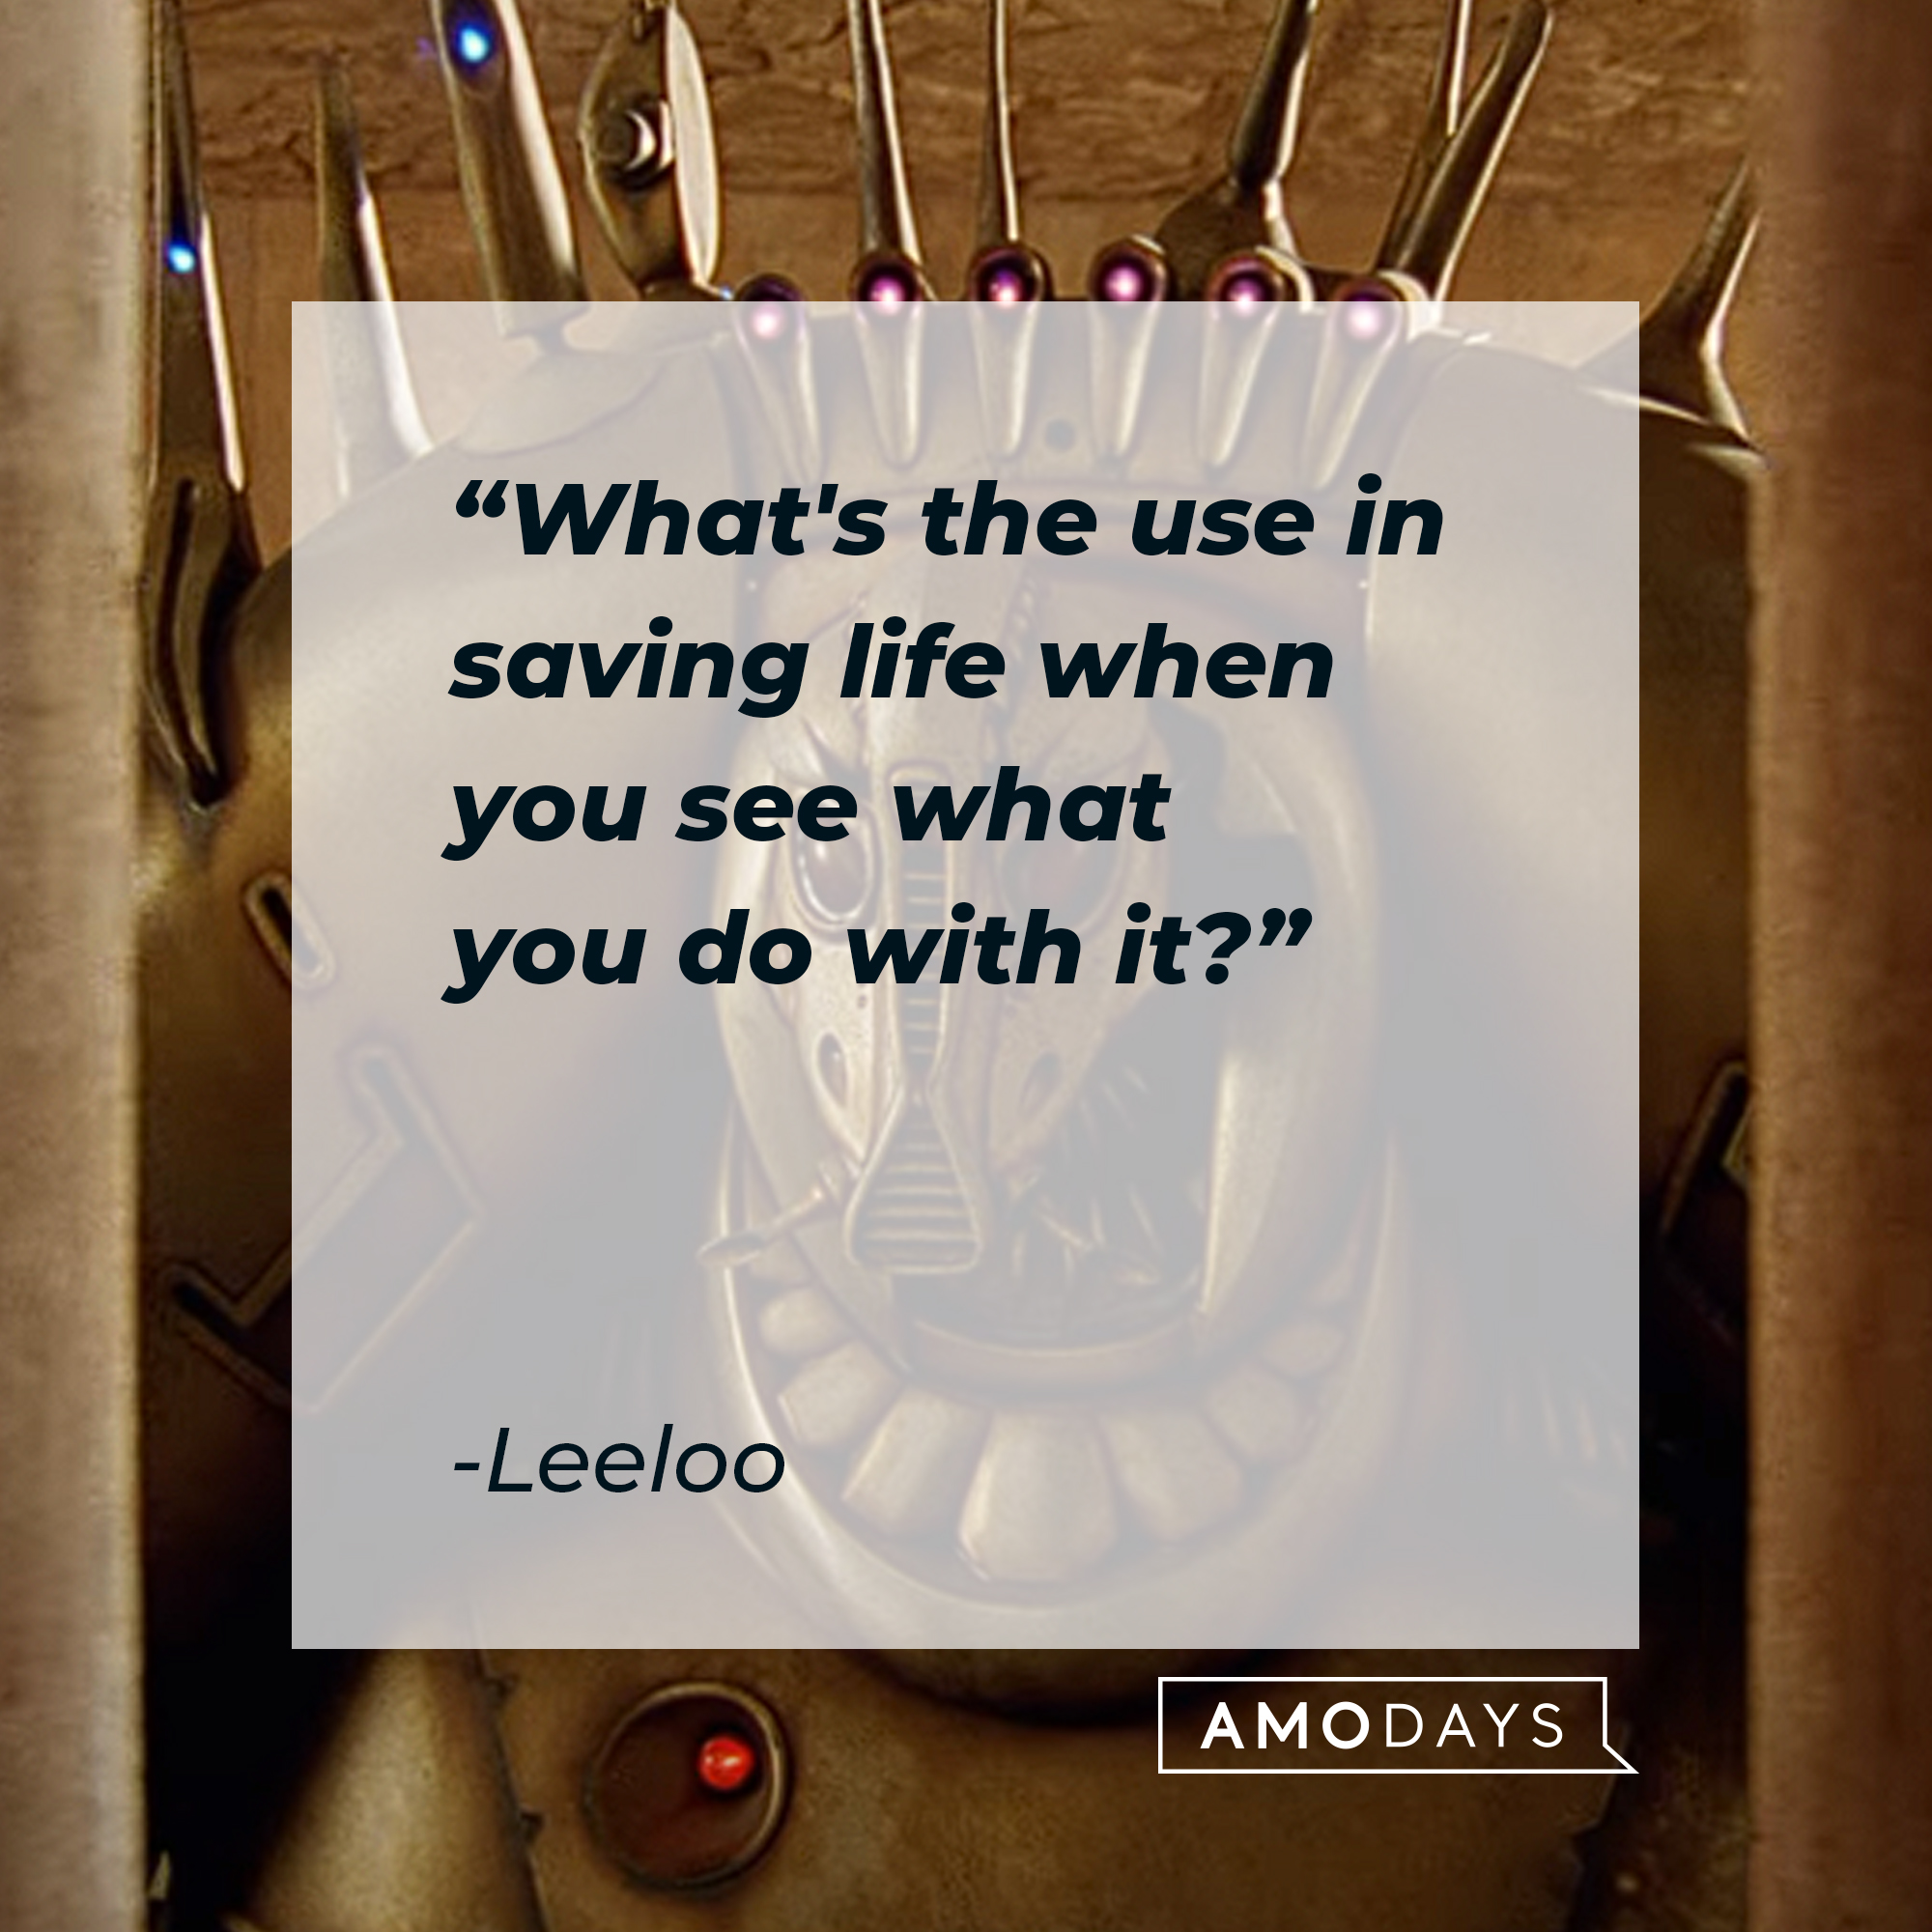 Leeloo's quote: "What's the use in saving life when you see what you do with it?" | Source: youtube.com/sonypictures